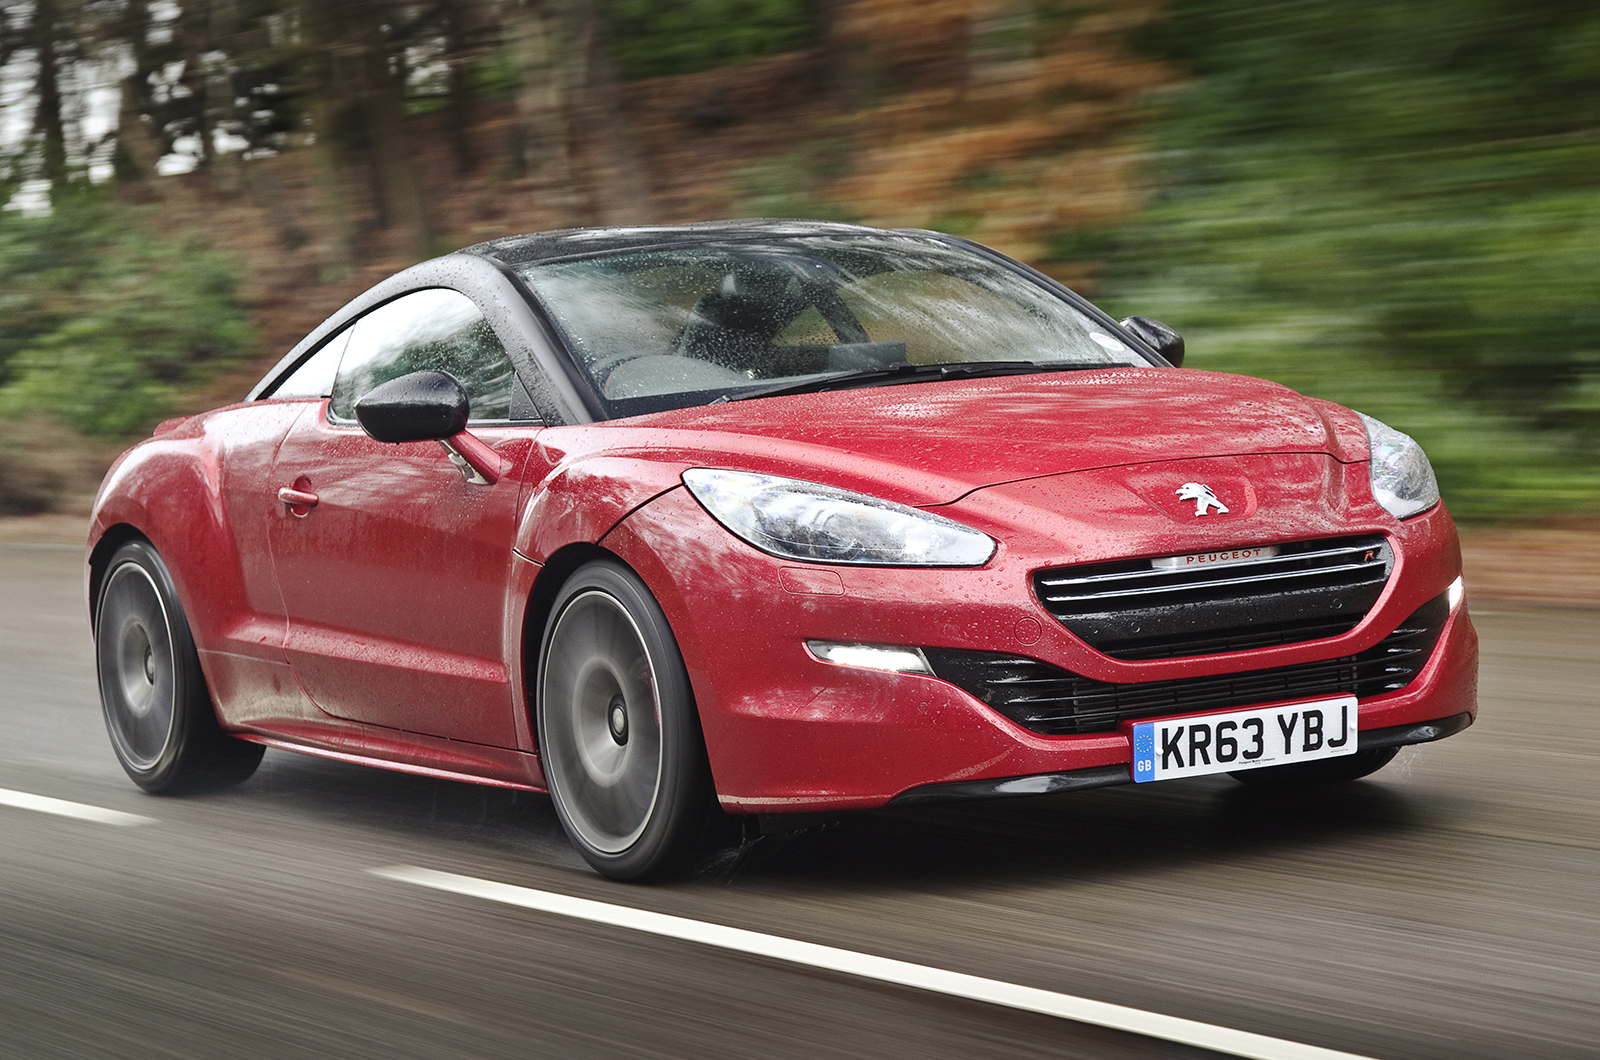 11 - The Least Reliable Cars You Can Buy - Peugeot RCZ